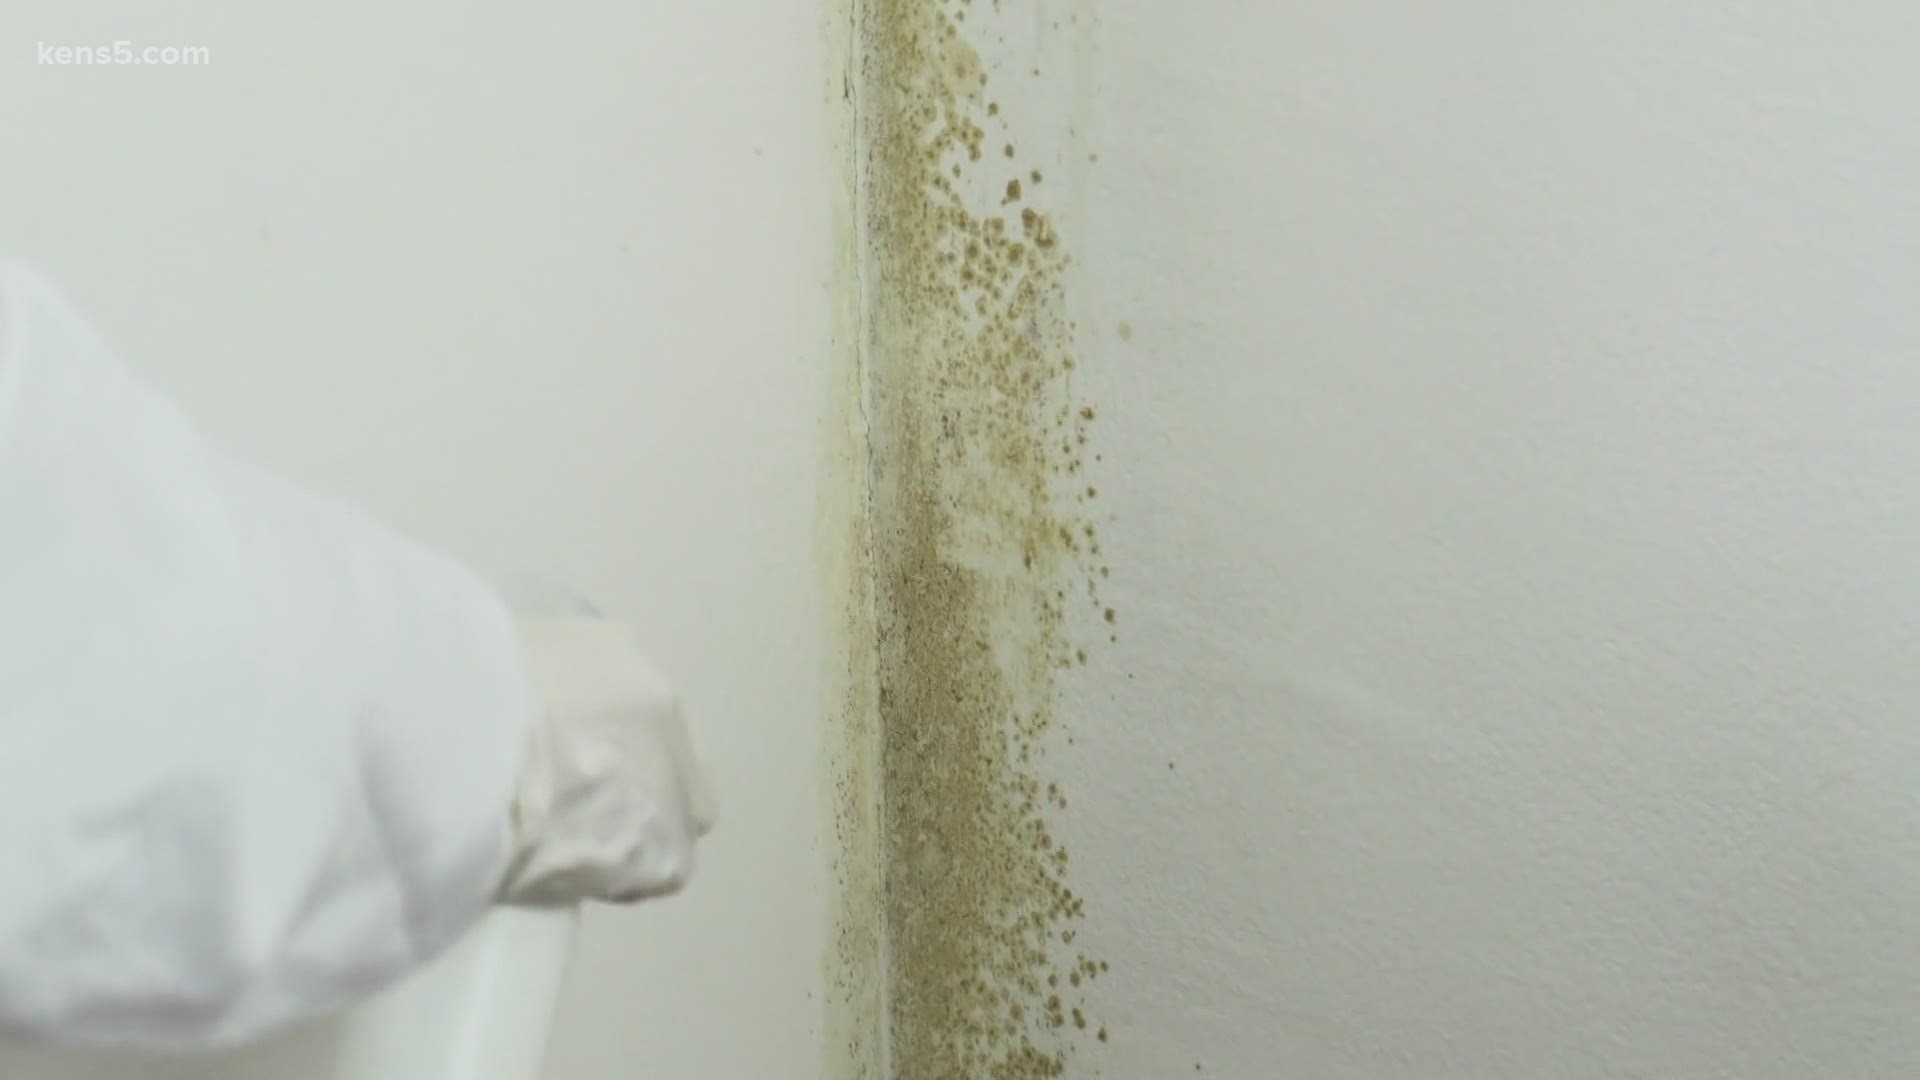 This month's winter storm has left Texas homeowners fixing damage to their properties. Don't wait to get rid of that mold.